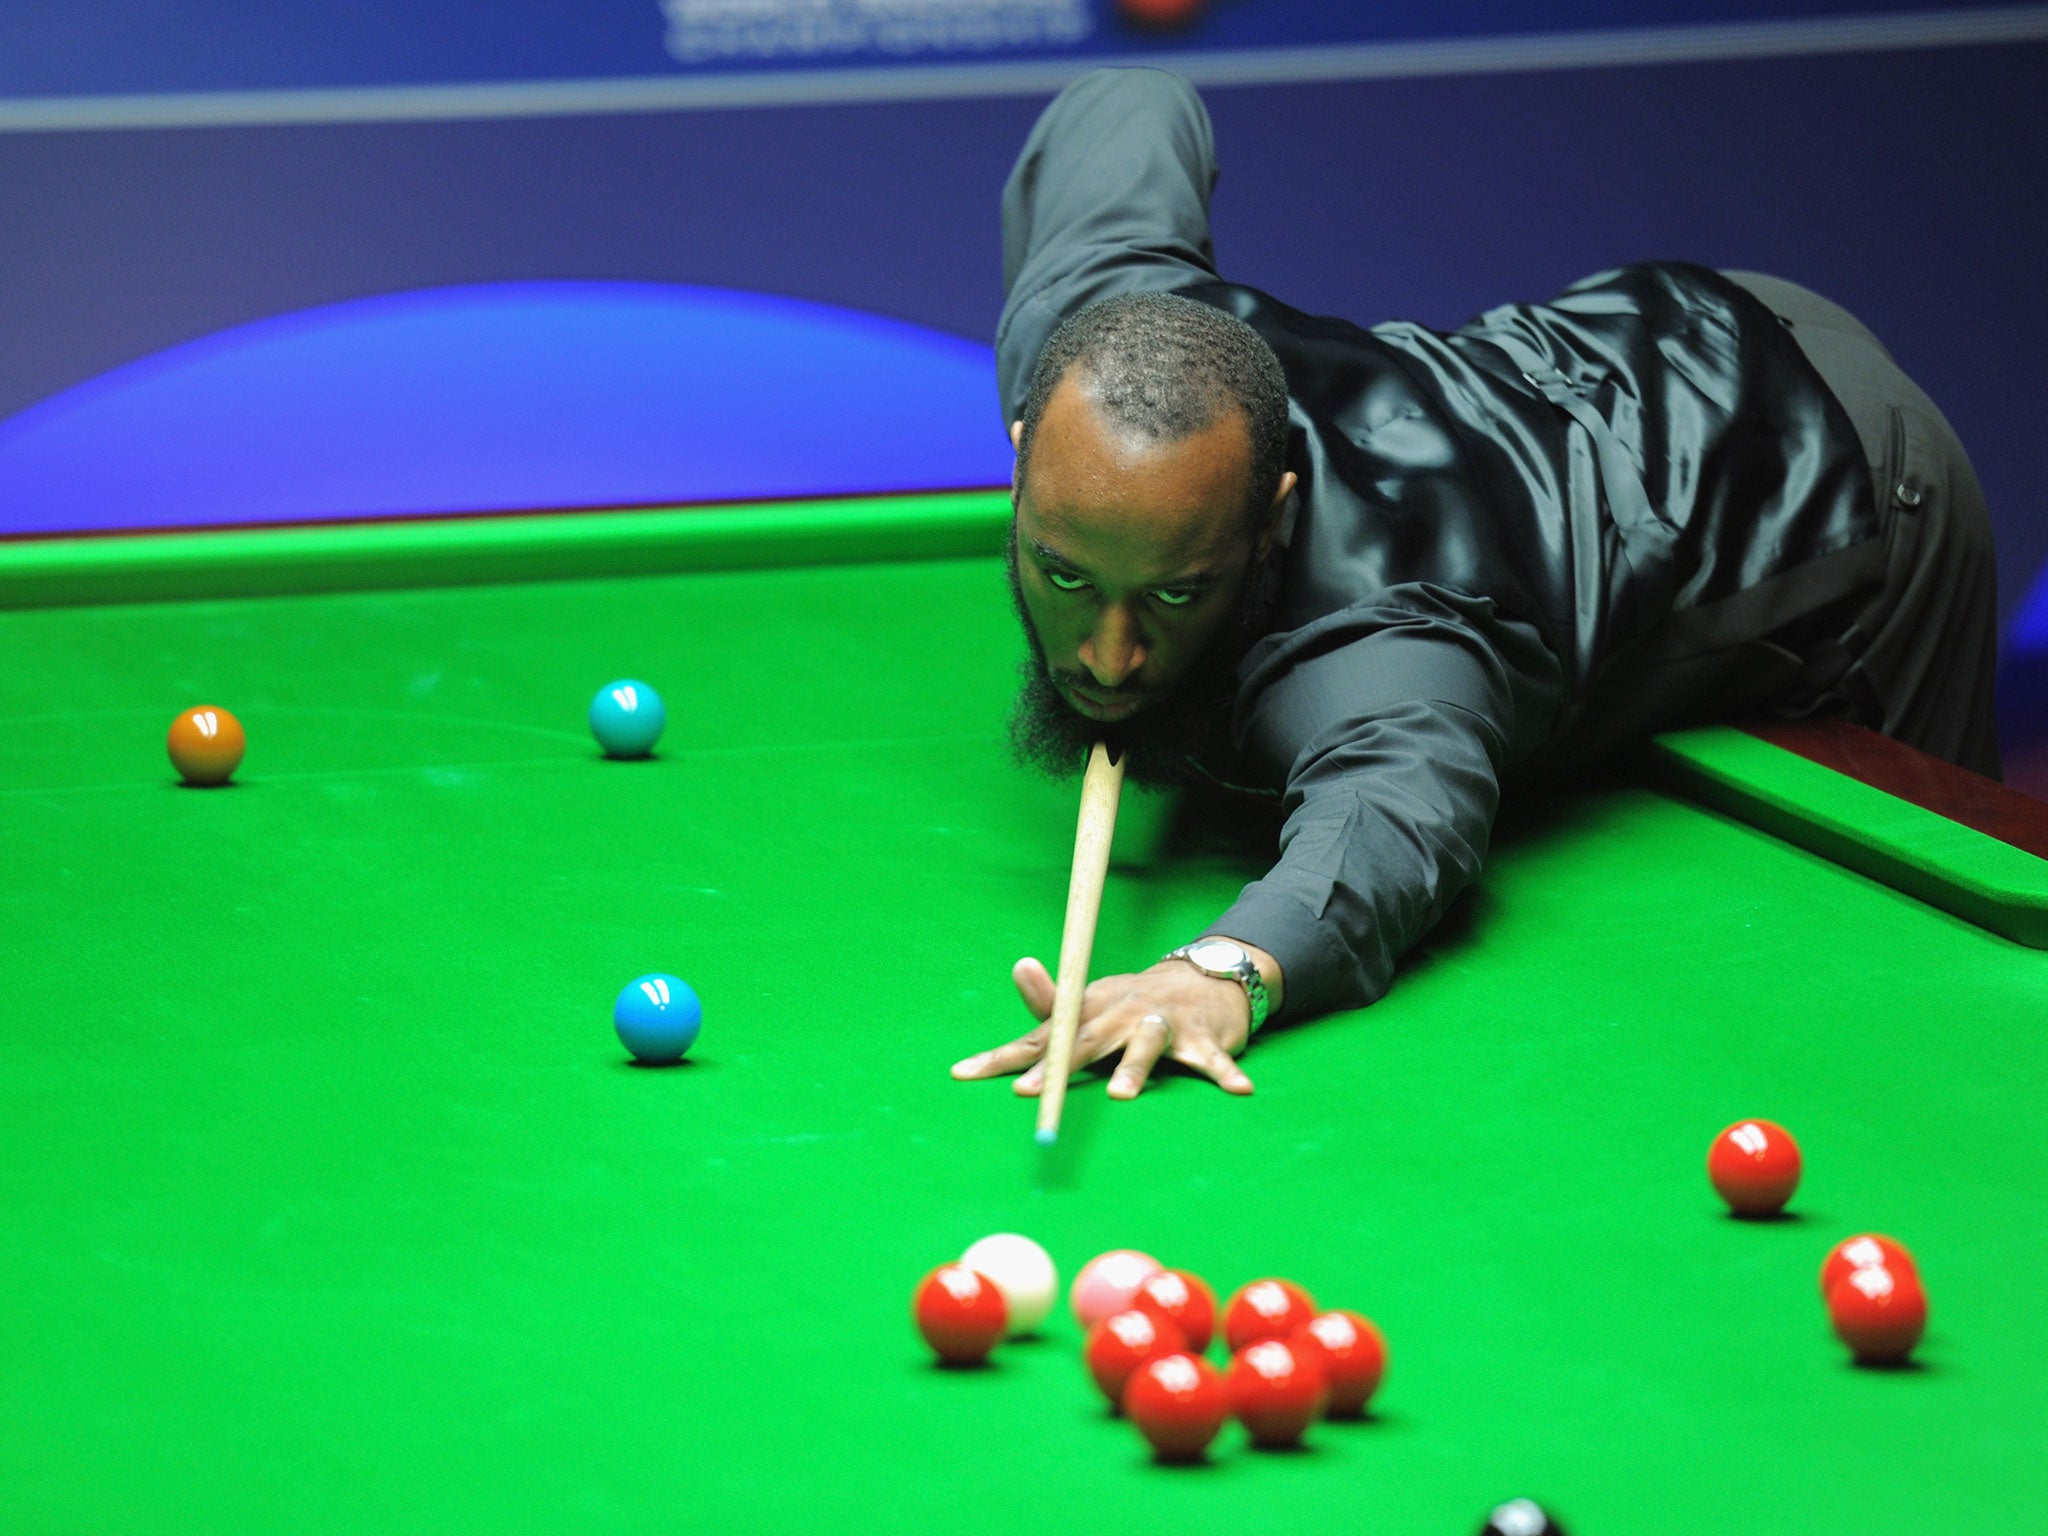 British snooker player Rory McLeod does not support terrorist group ISIS